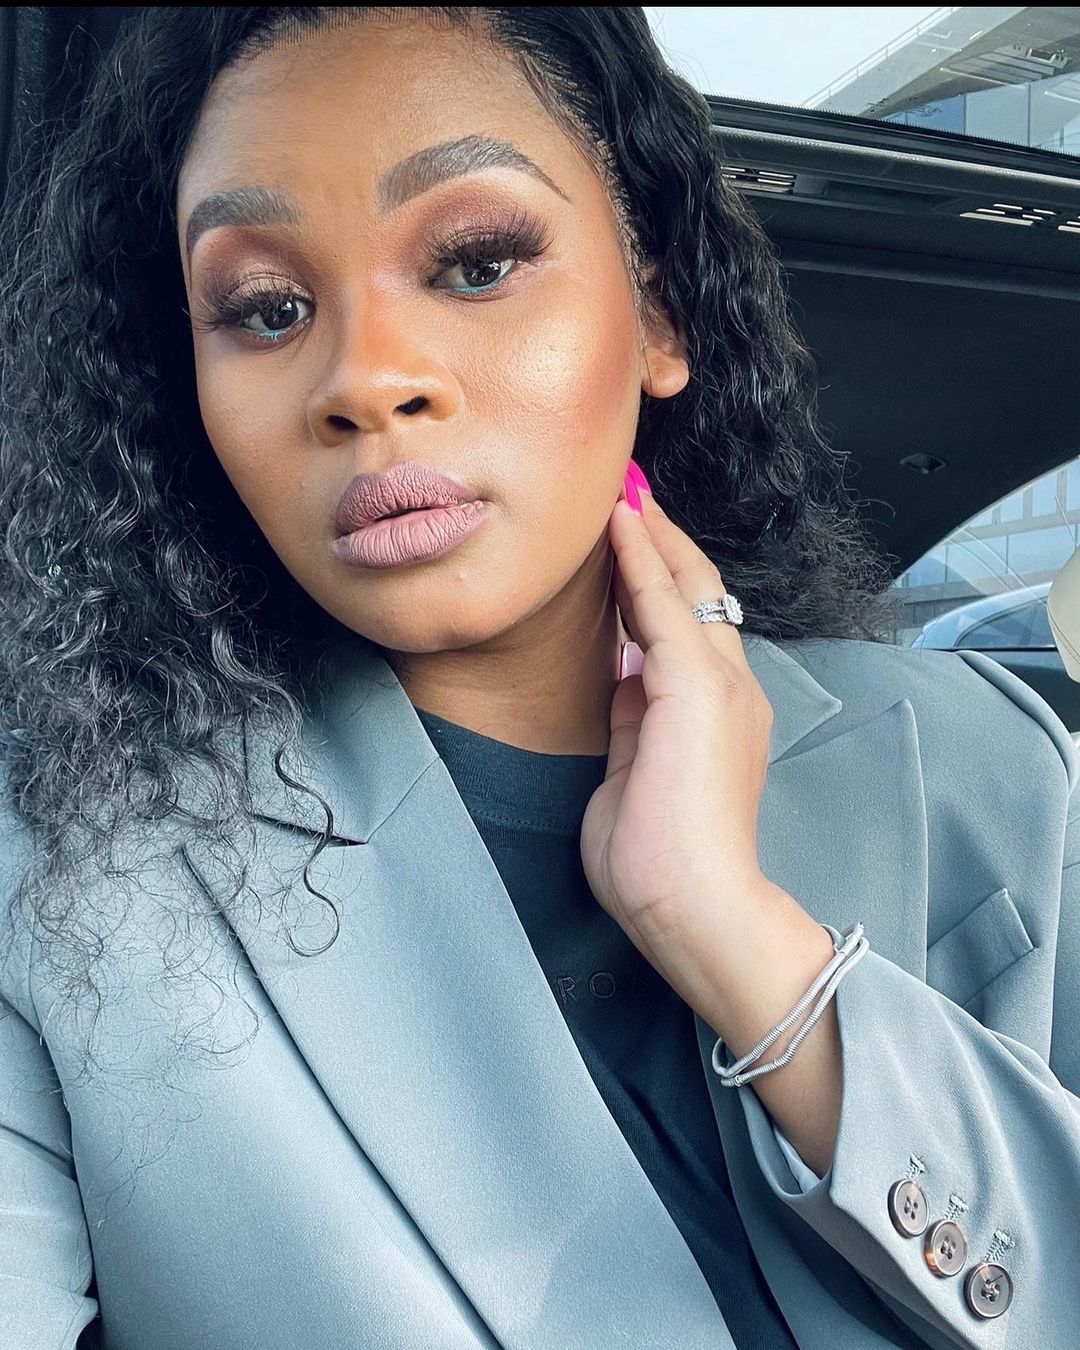 She is overrated – Mzansi think time is up for Lady Du